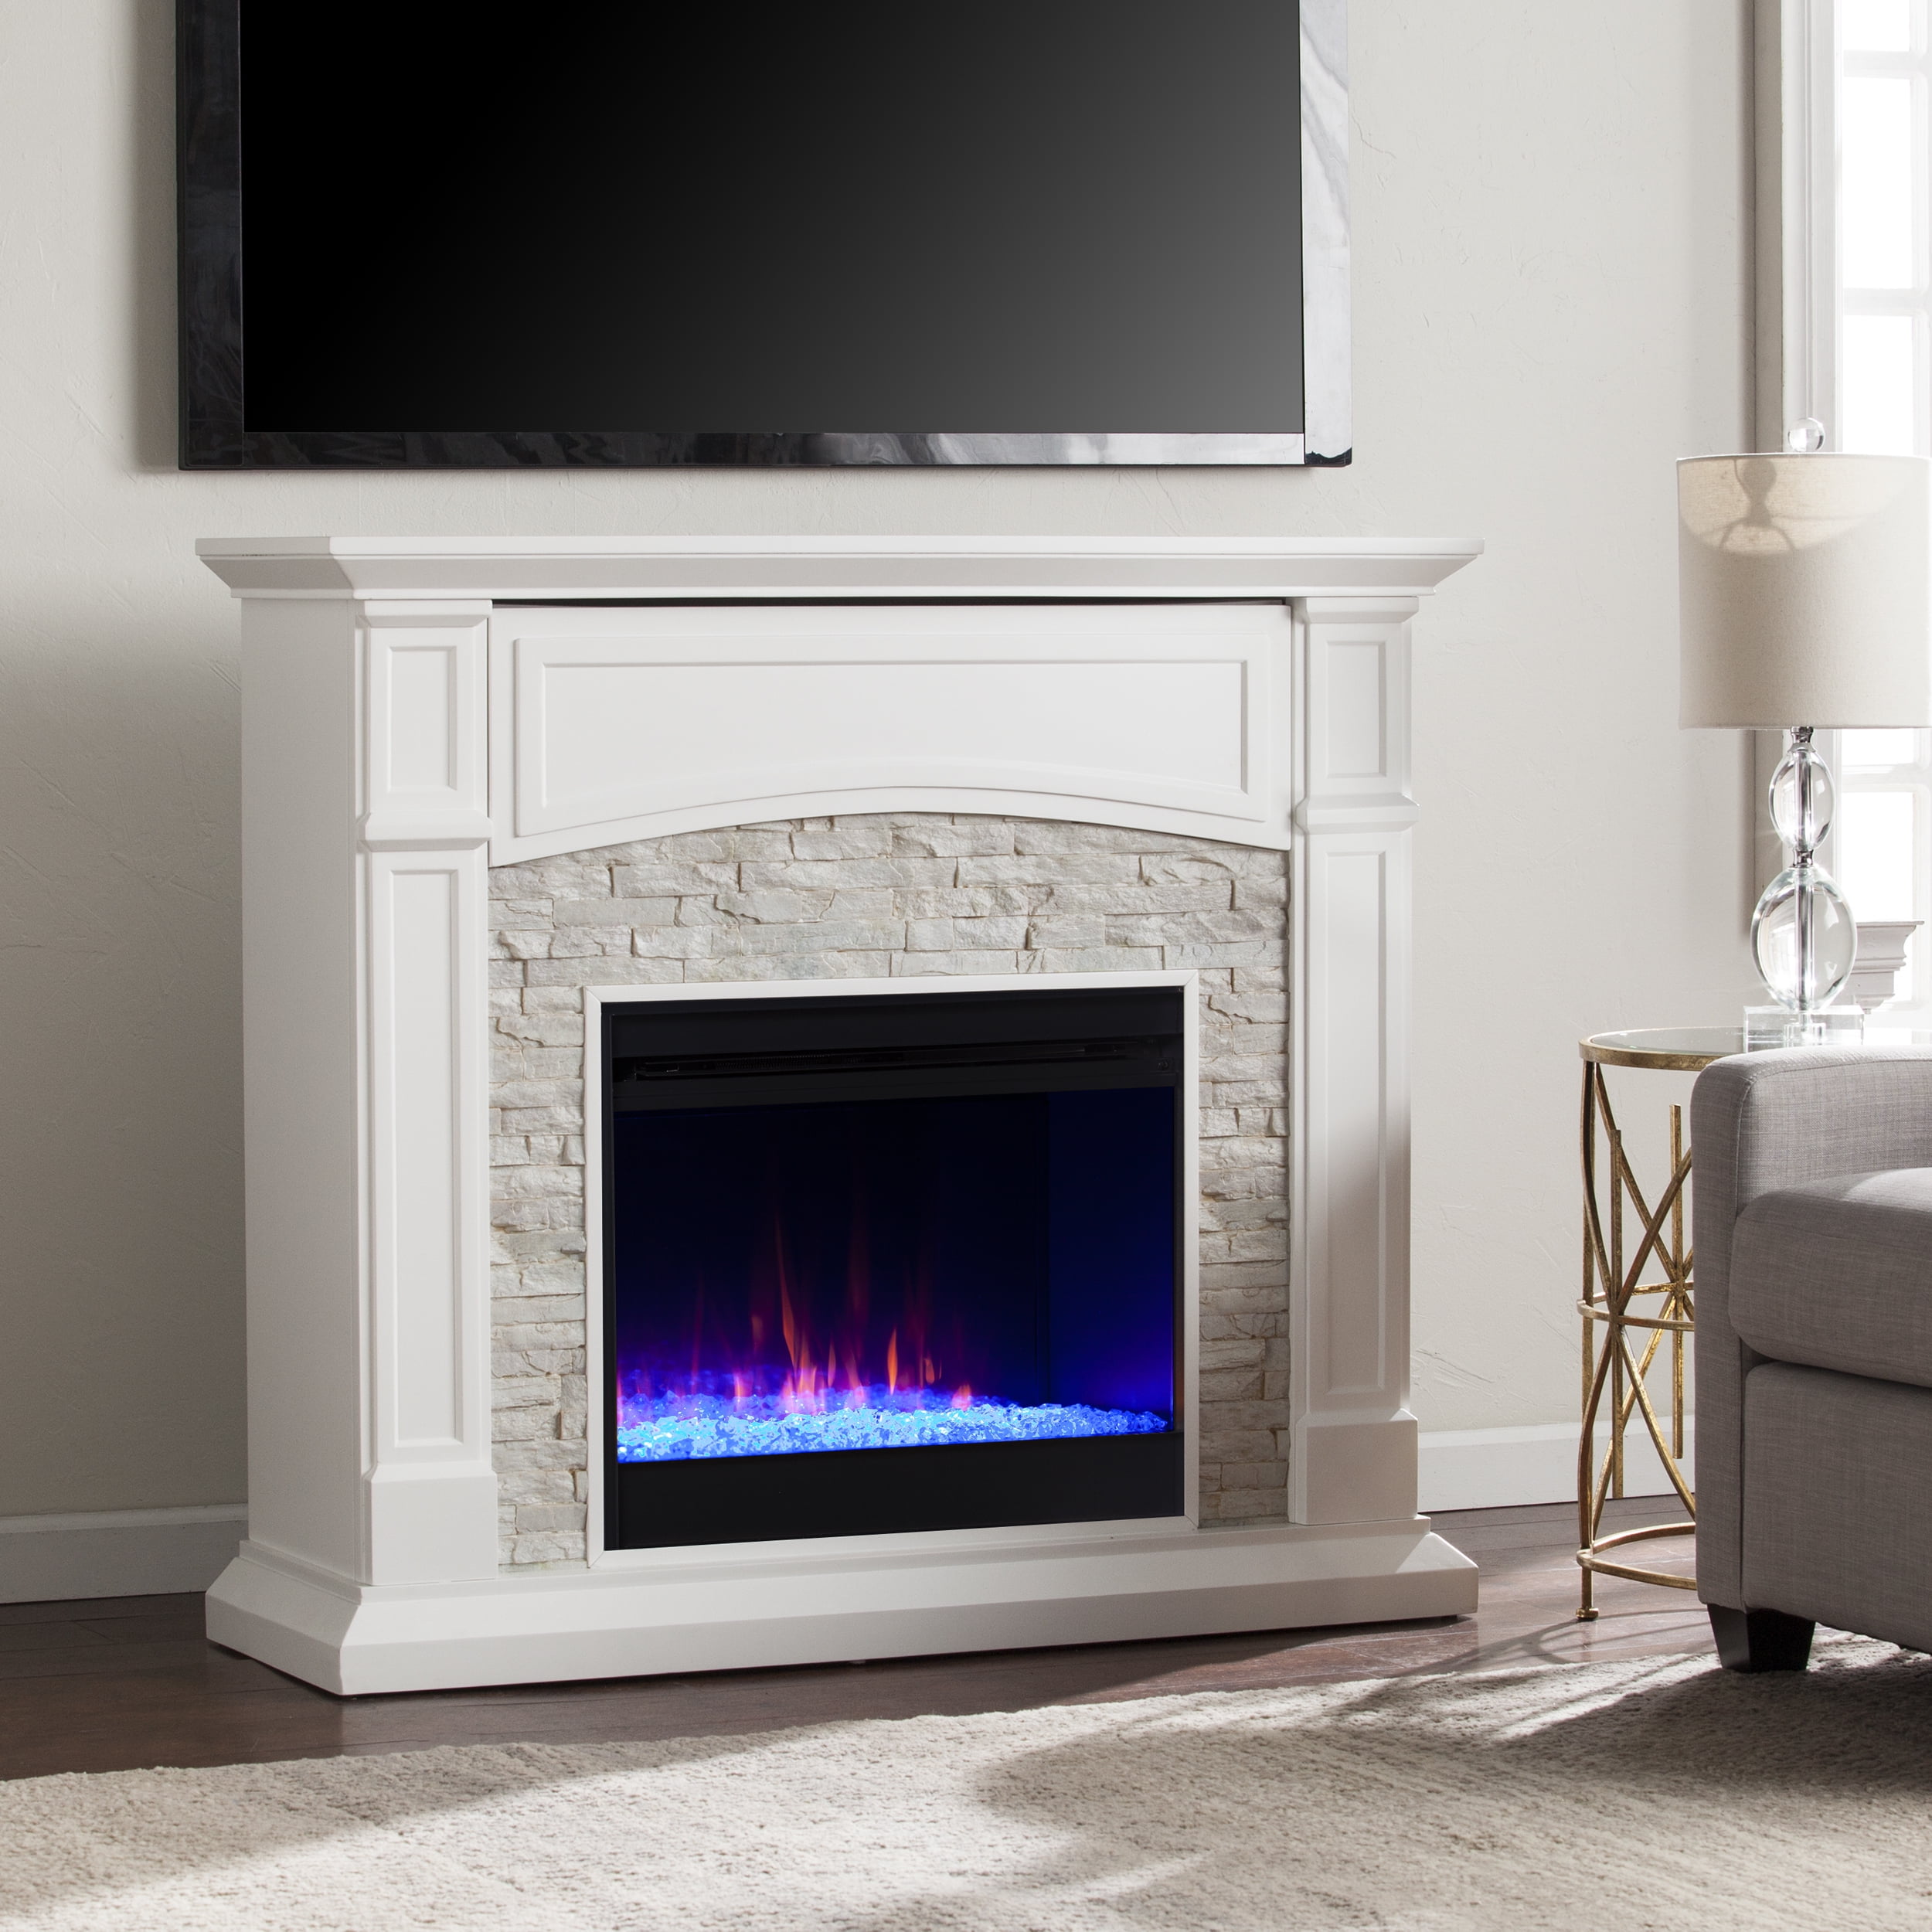 Kipling Electric Fireplace In White, Real Flame Kipling Faux Marble Electric Fireplace In White